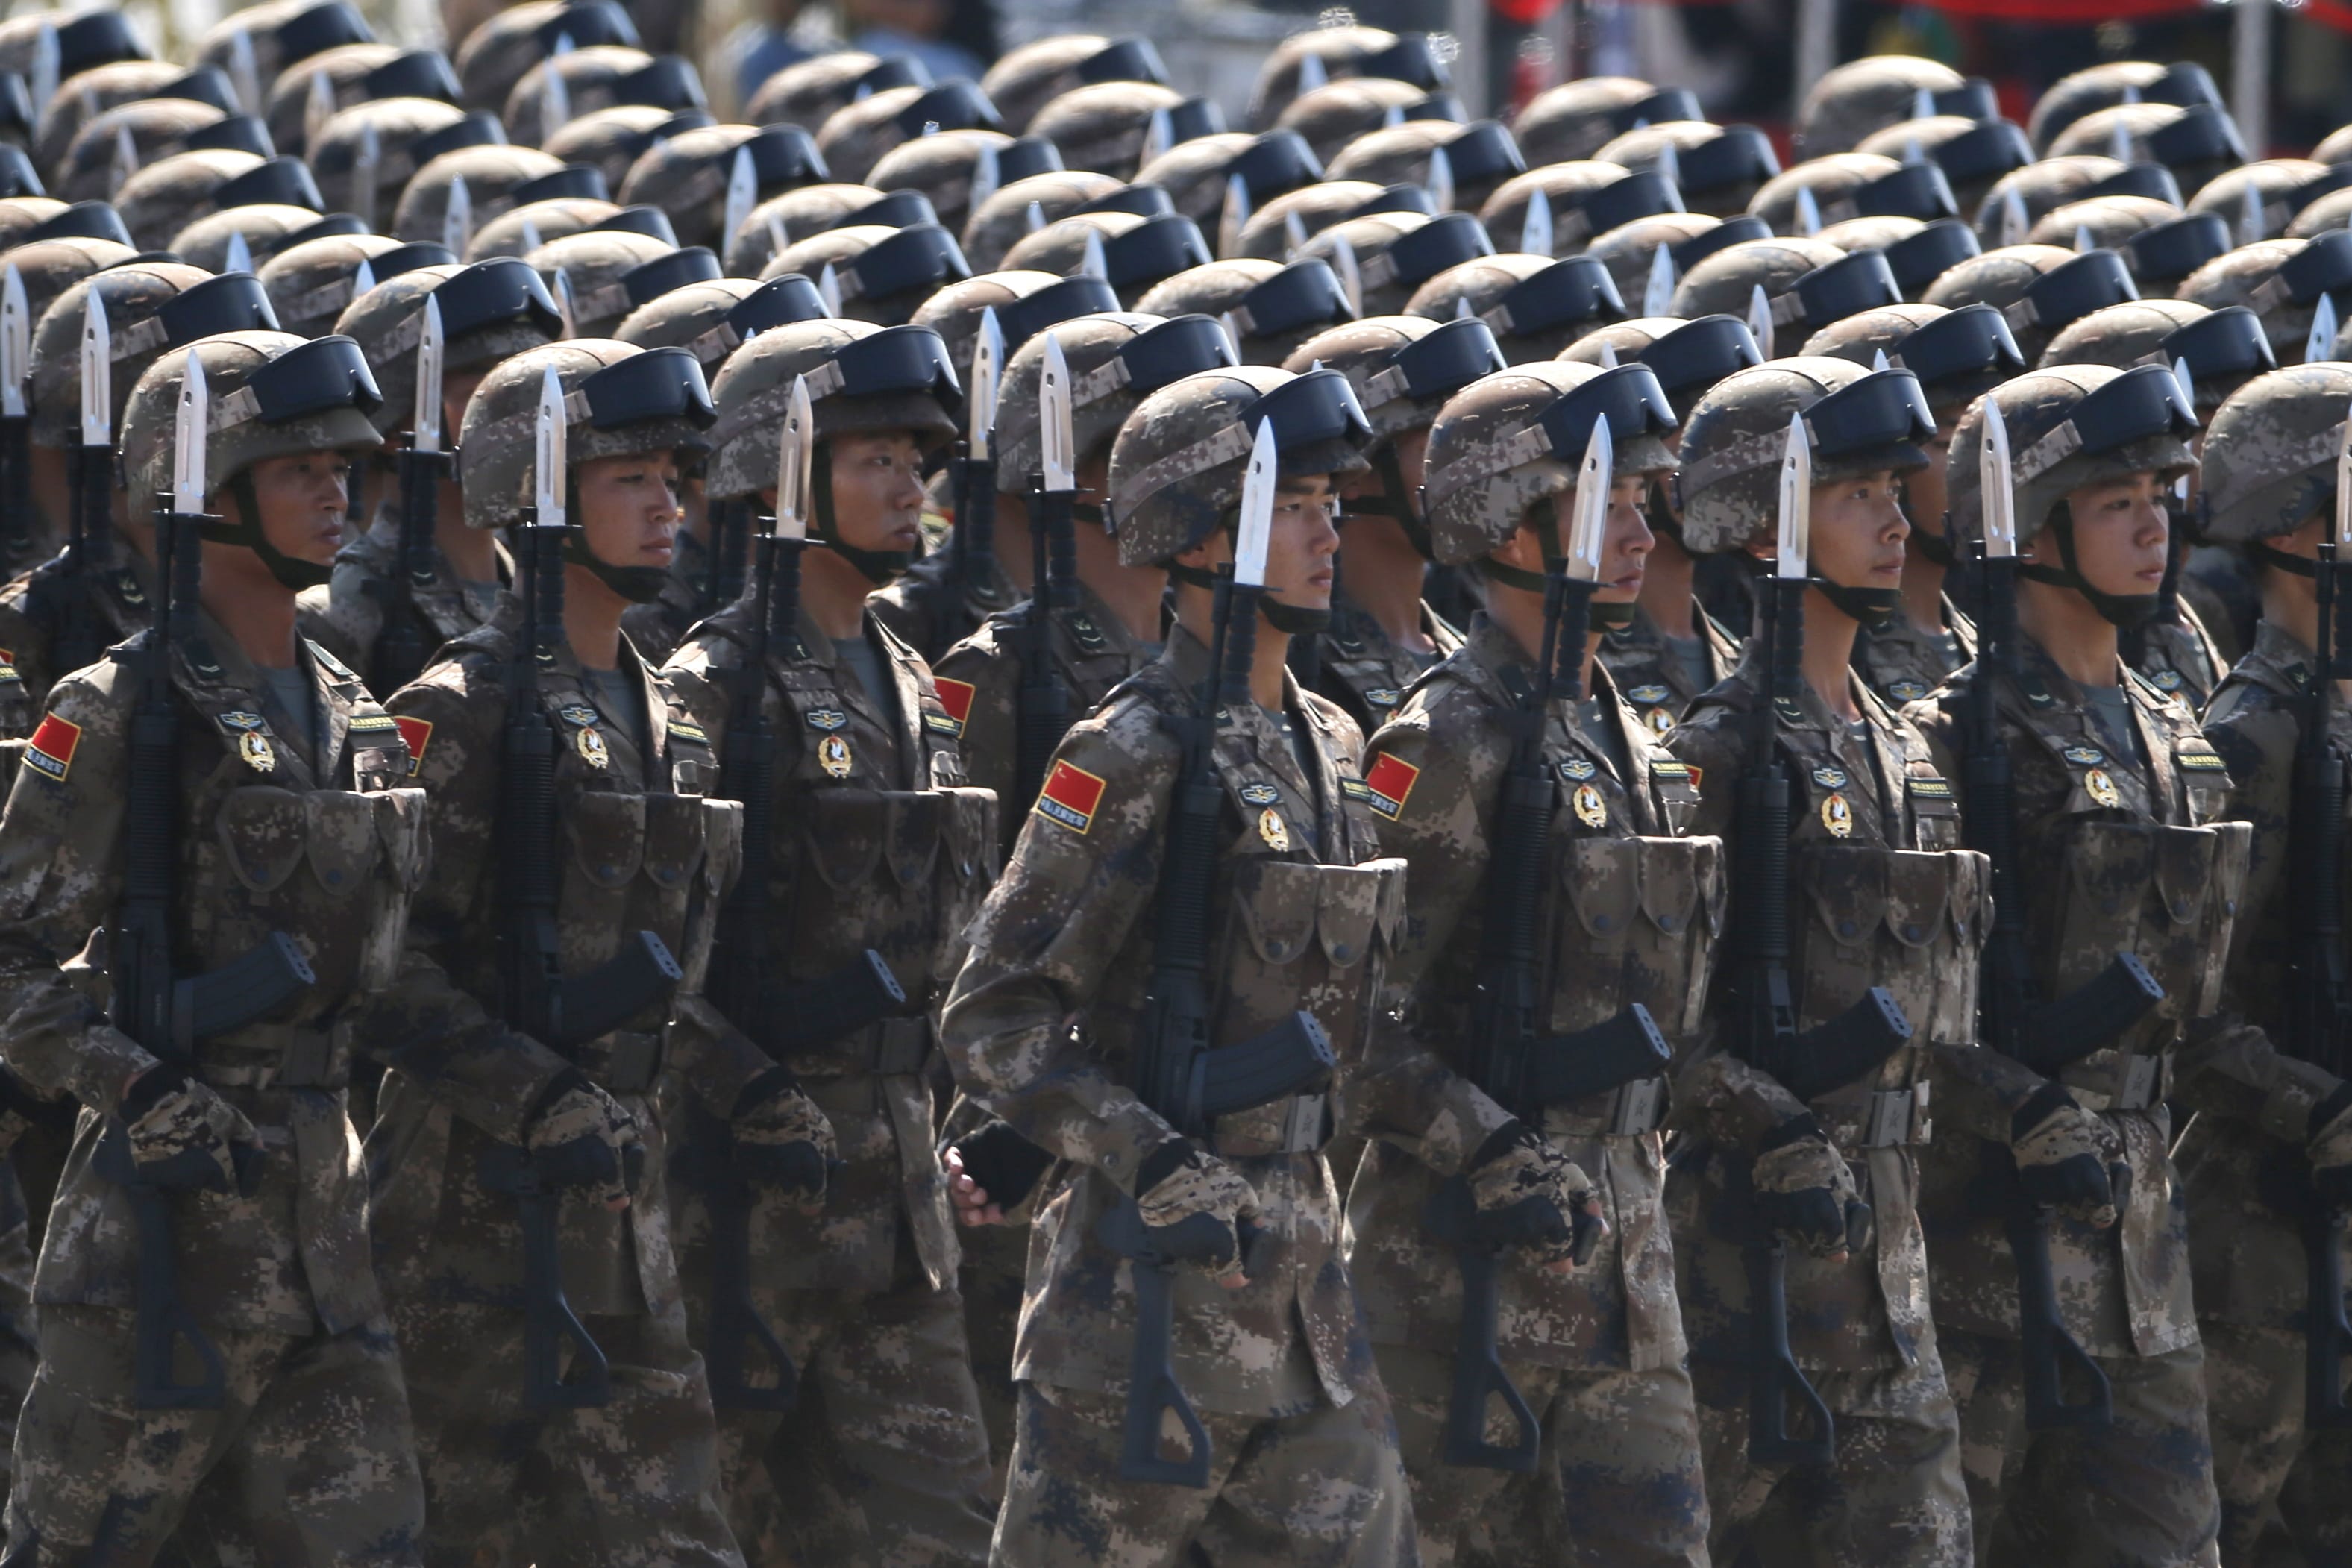 Chinese soldiers take part in a parade commemorating the 70th anniversary of Japan's surrender during World War II in front of Tiananmen Gate in Beijing, Thursday, Sept. 3, 2015. The spectacle involved more than 12,000 troops, 500 pieces of military hardware and 200 aircraft of various types, representing what military officials say is the Chinese military's most cutting-edge technology.